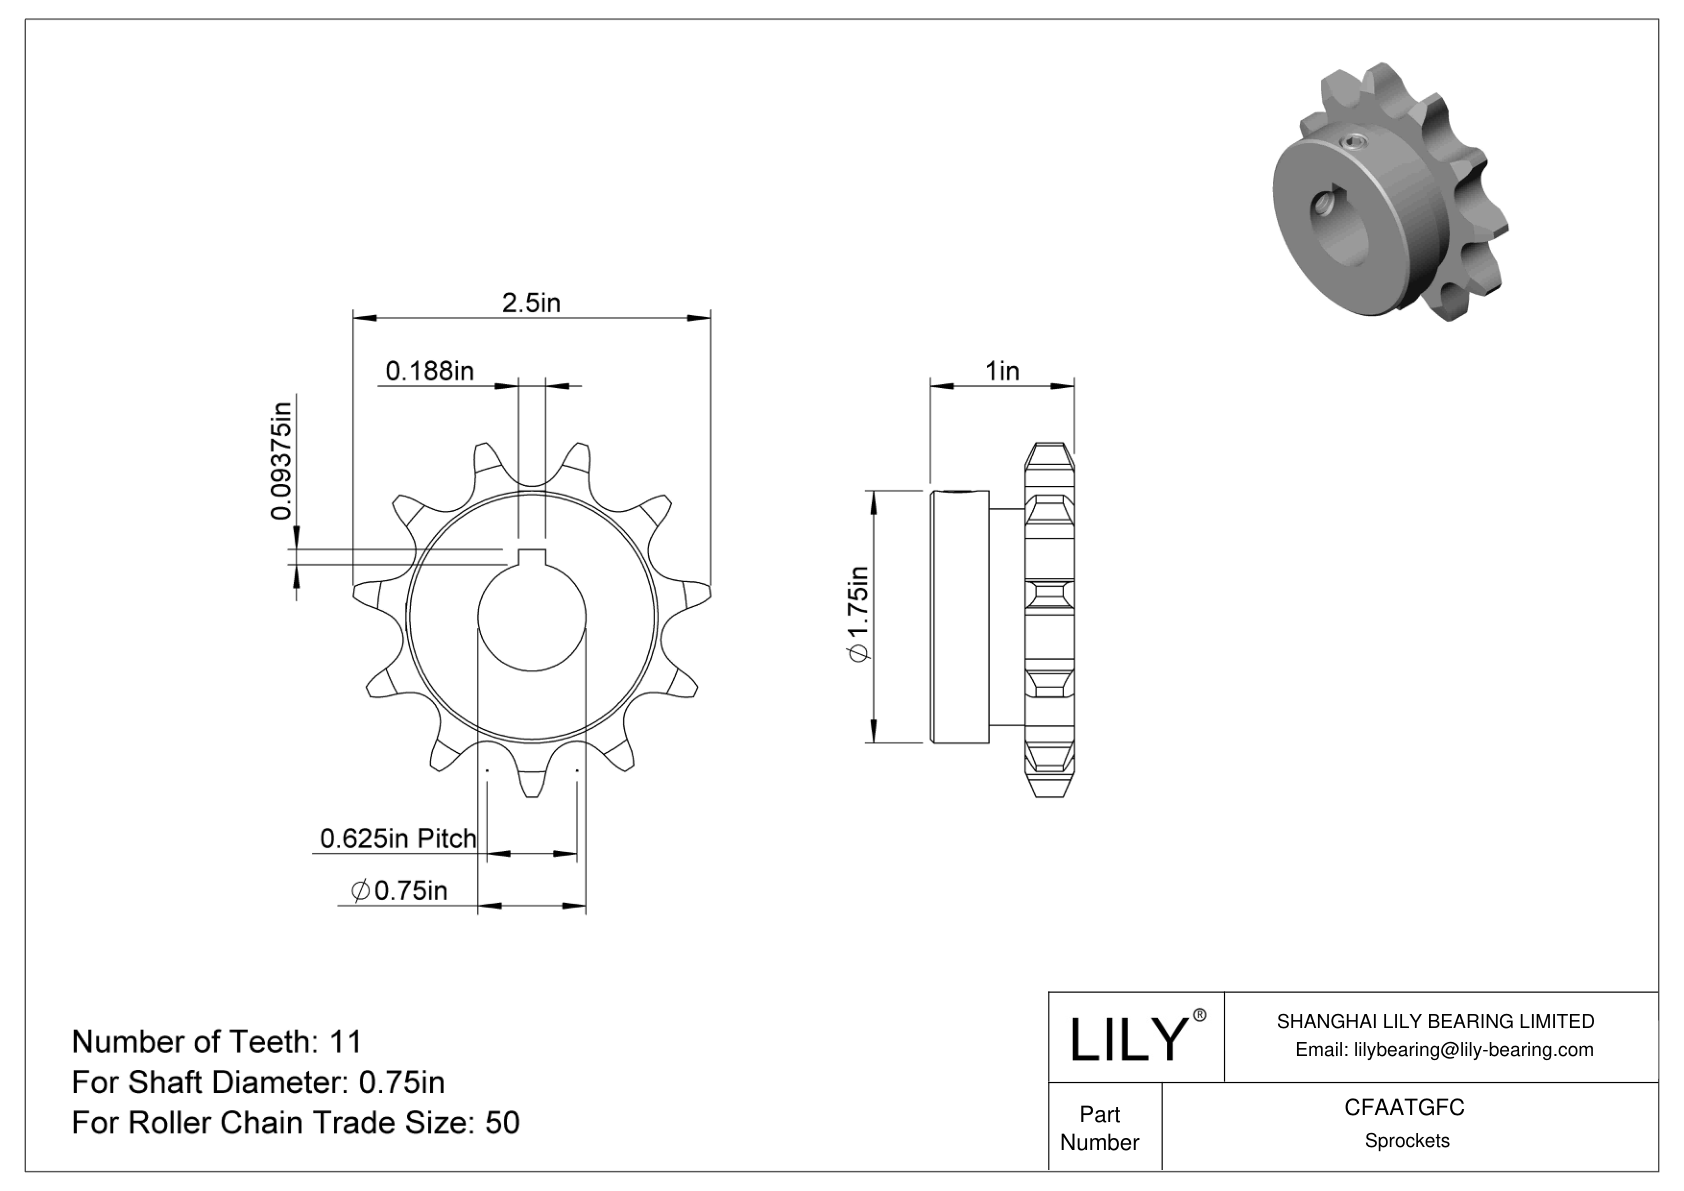 CFAATGFC Wear-Resistant Sprockets for ANSI Roller Chain cad drawing